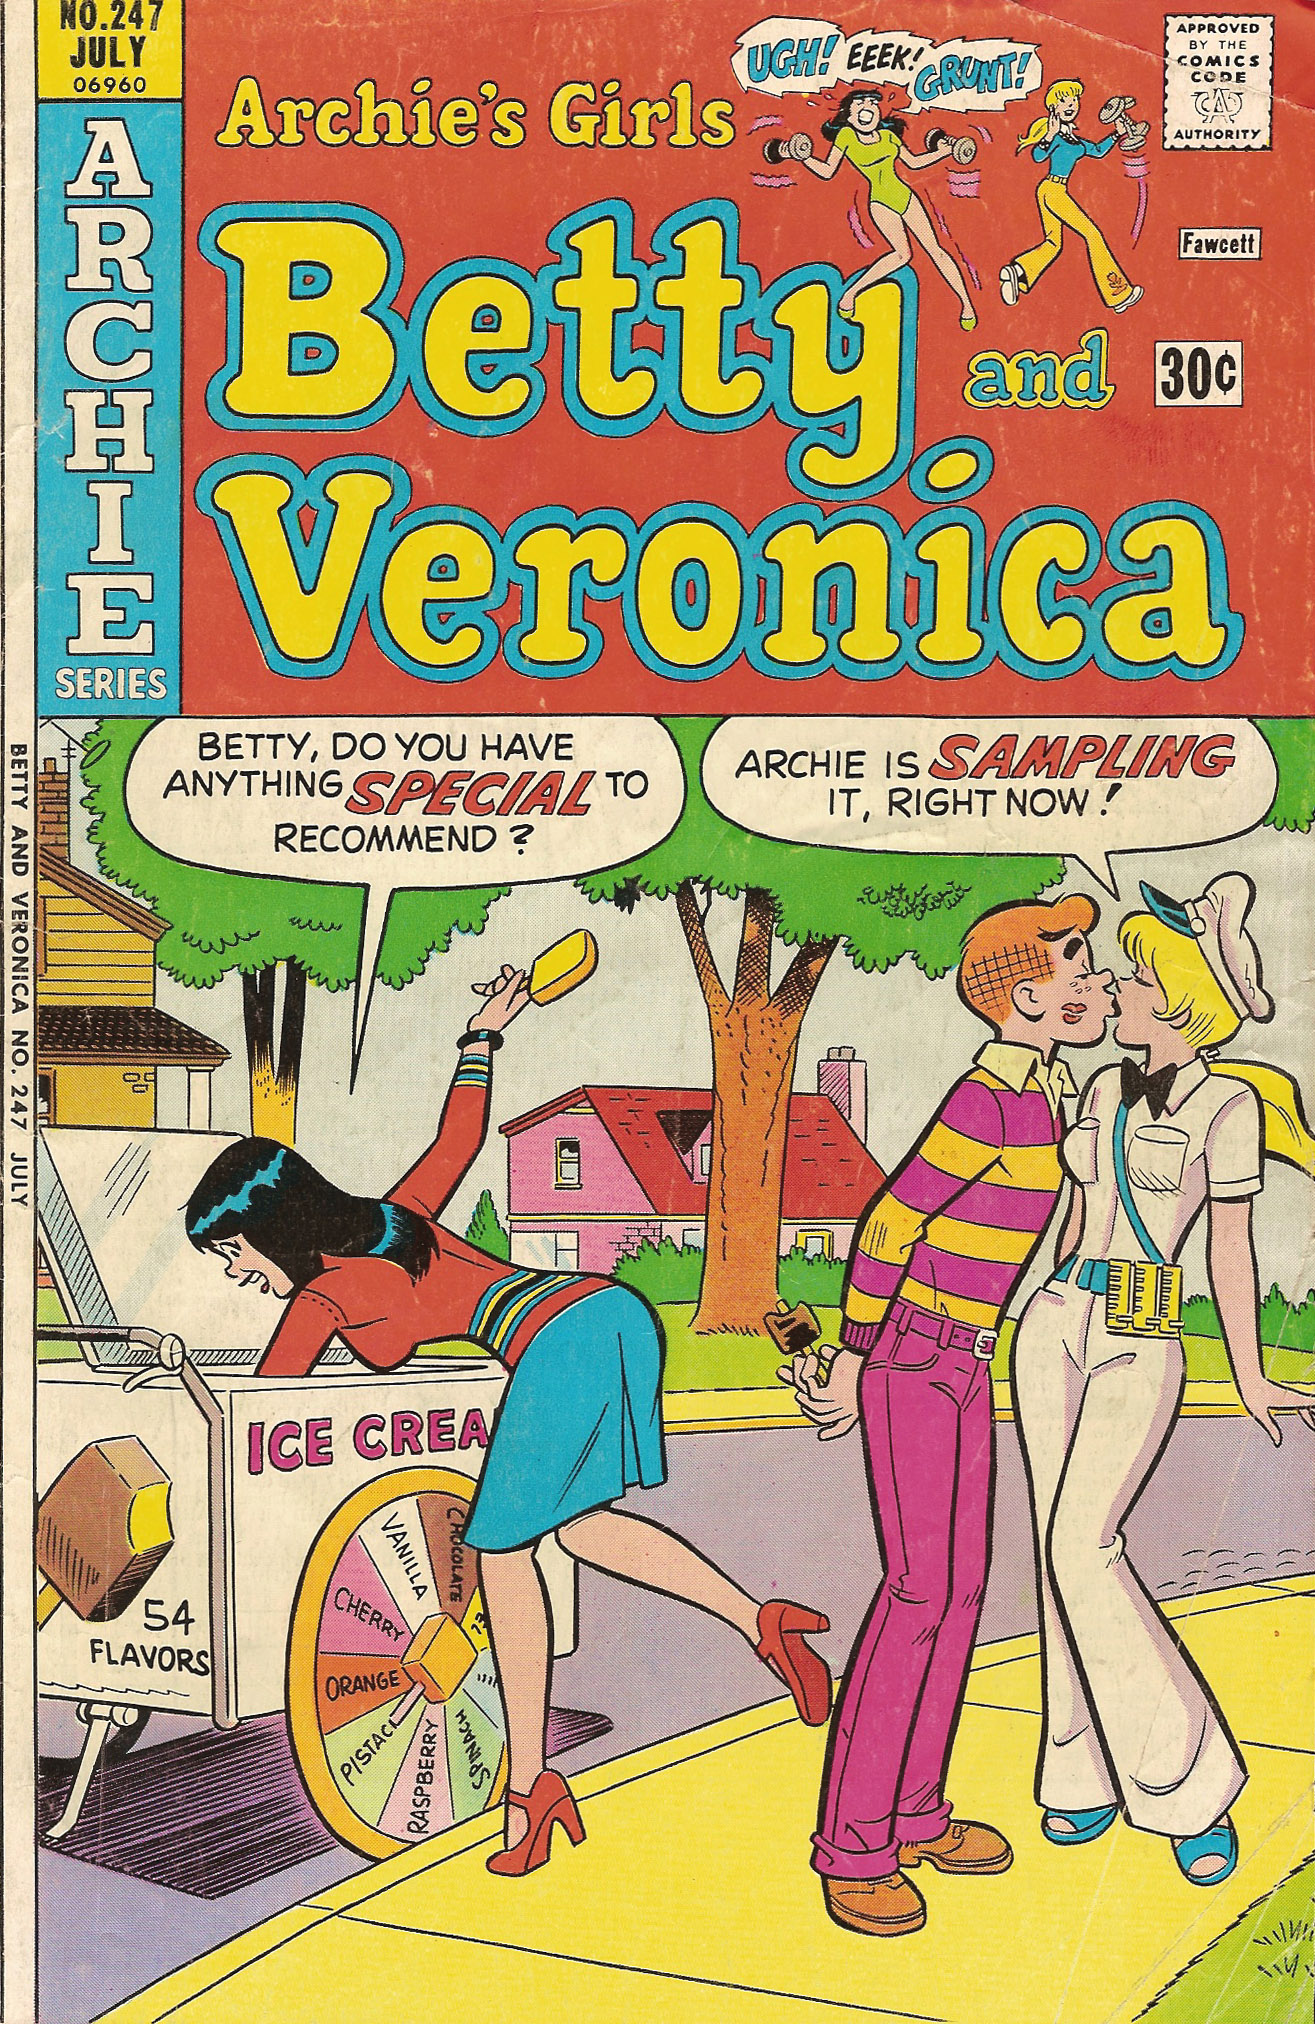 Read online Archie's Girls Betty and Veronica comic -  Issue #247 - 1